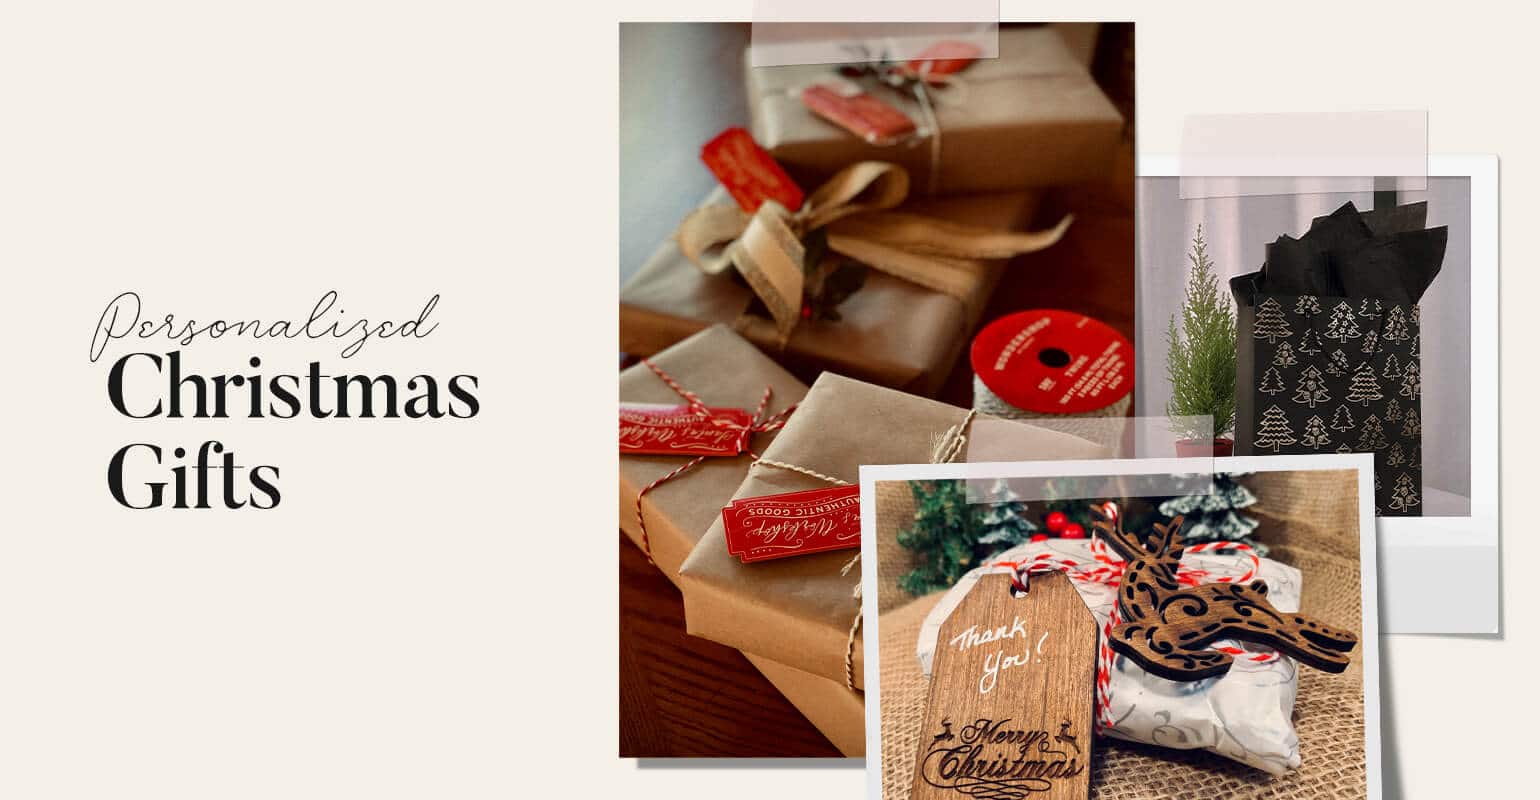 15 Personalized Christmas Gifts You Can Get From Santa’s Workshop